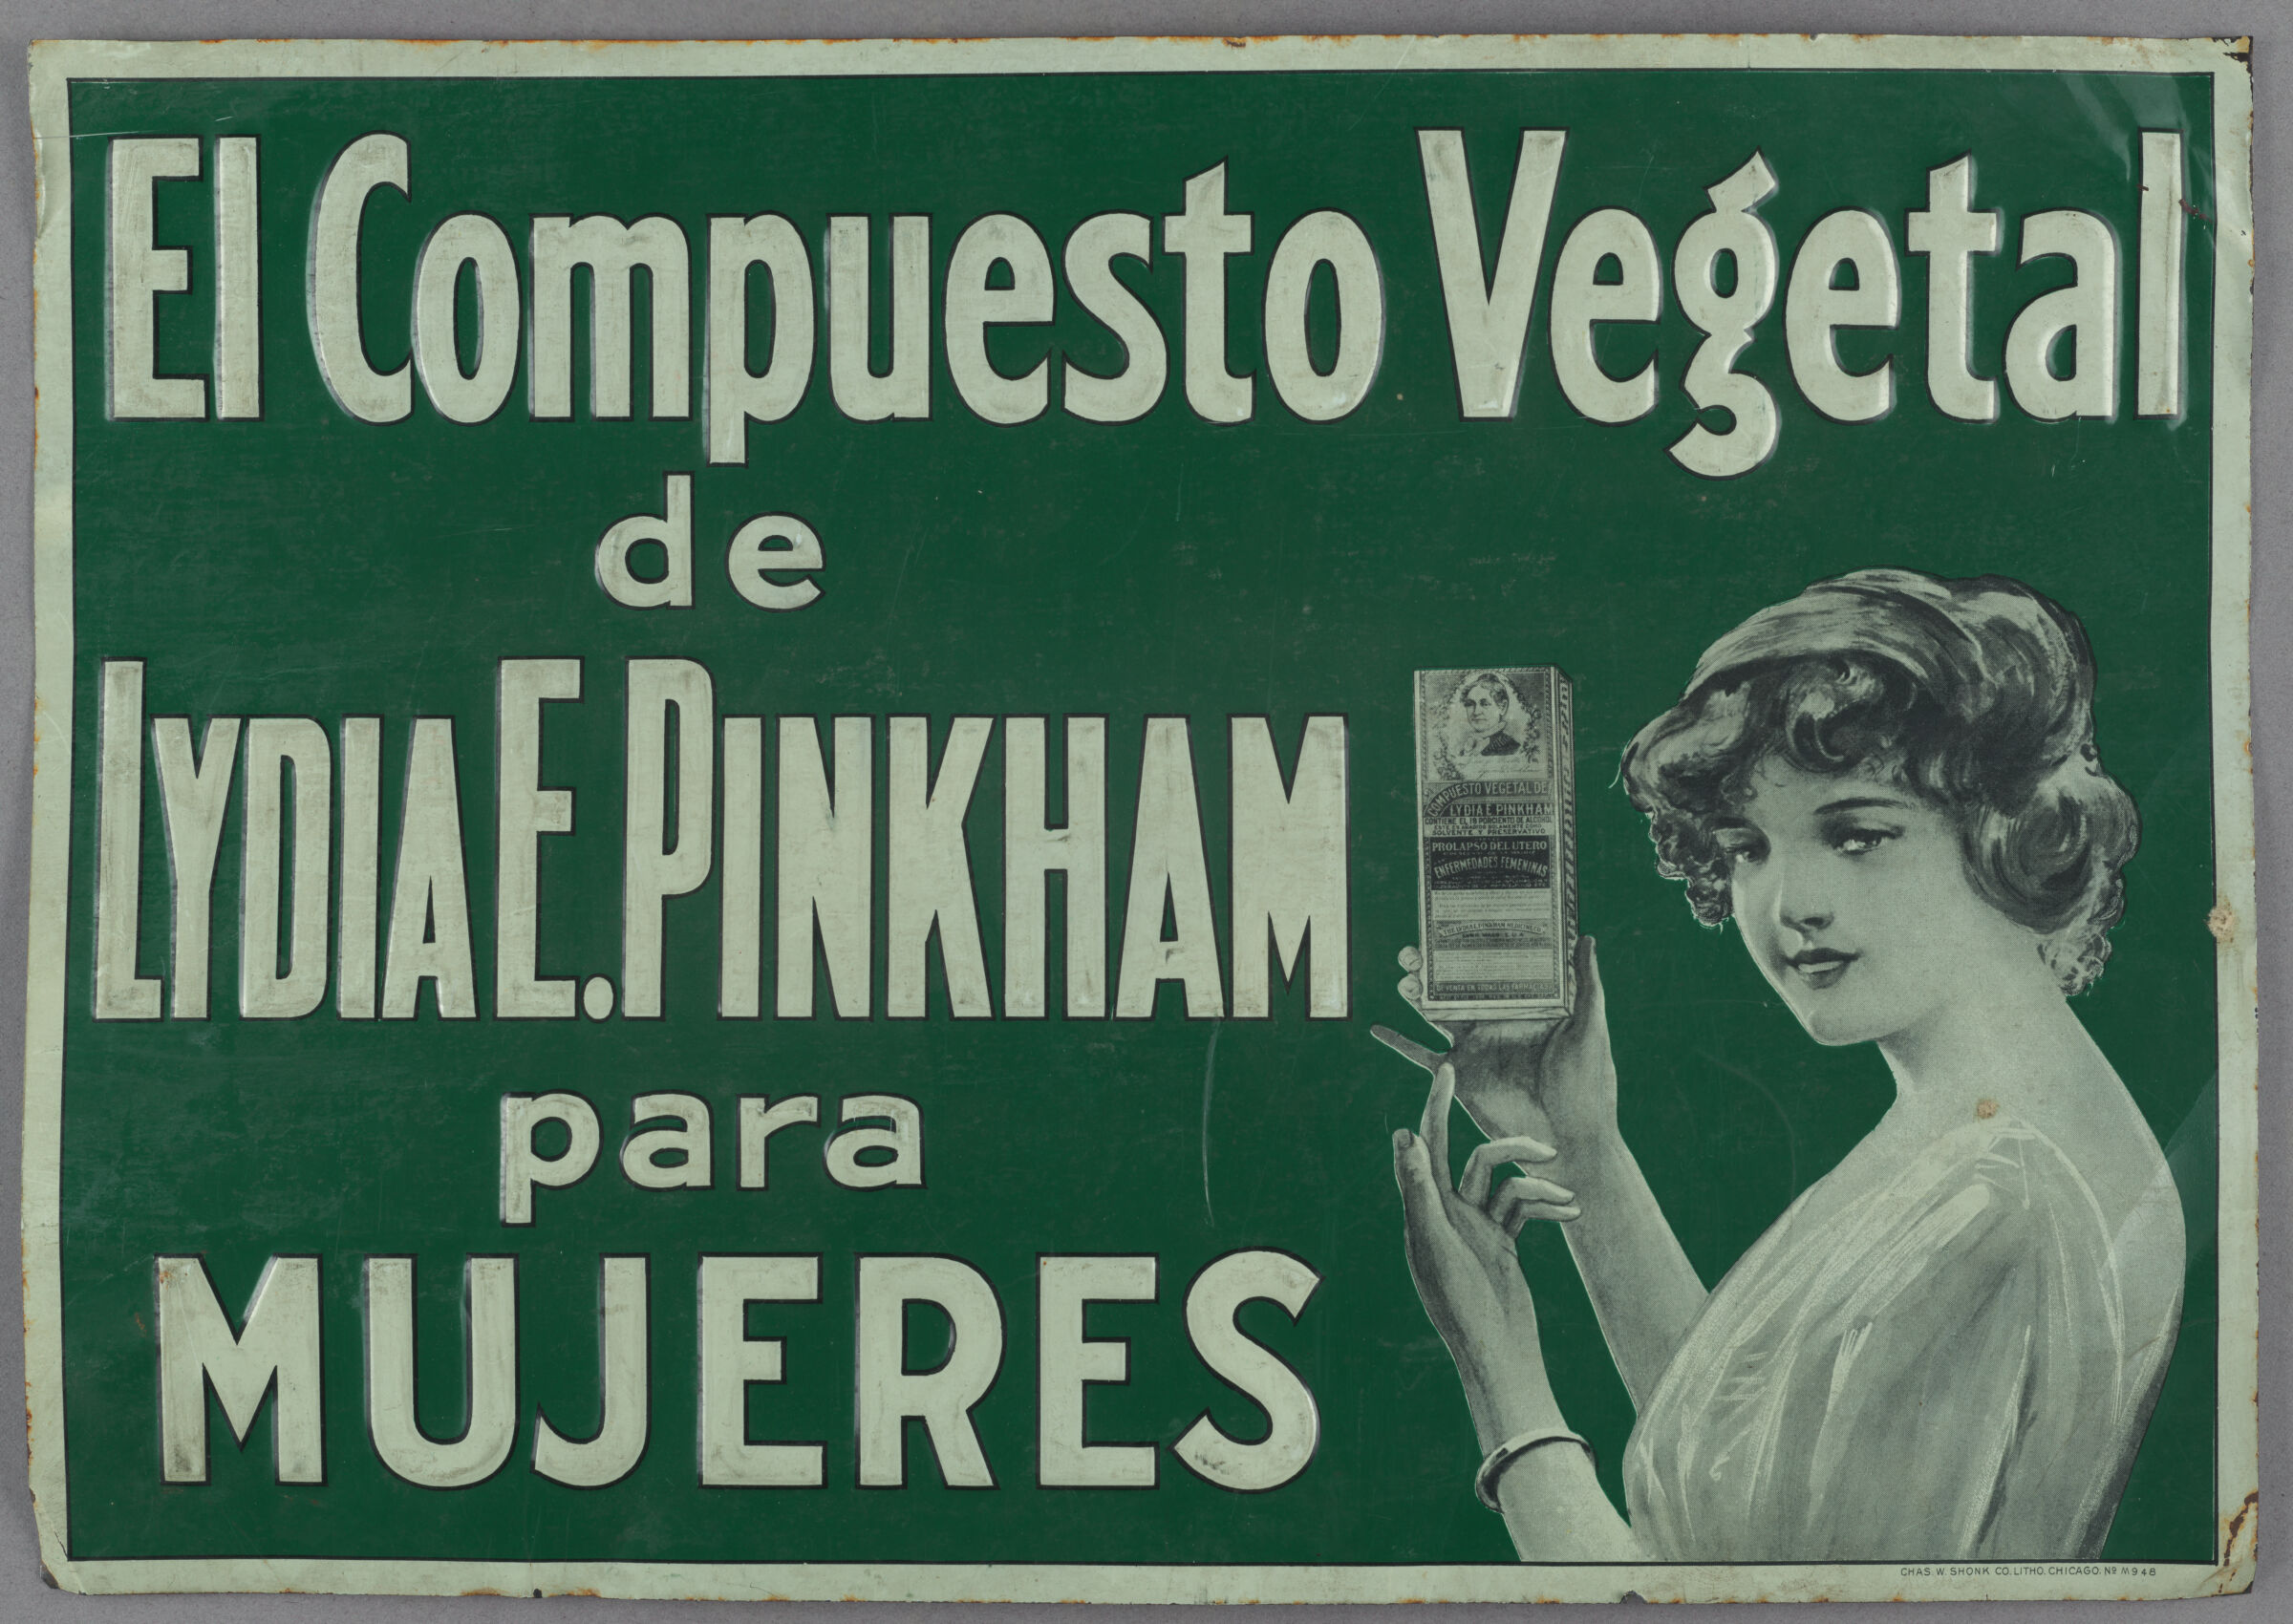 Advertisement for Lydia E. Pinkham in Spanish.